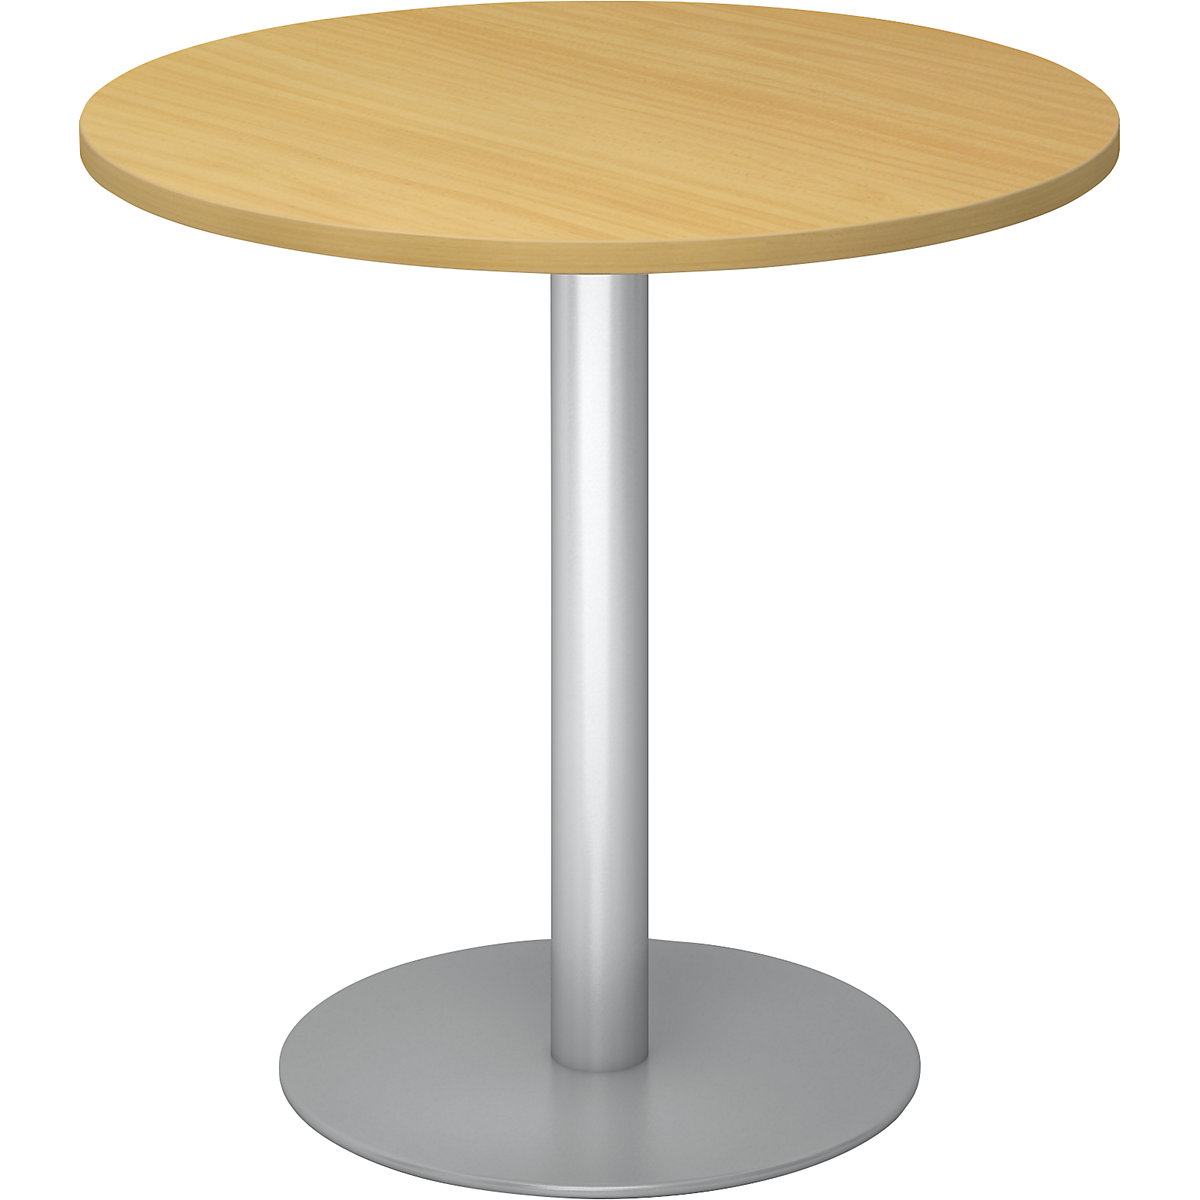 Conference table, Ø 800 mm, 755 mm high, silver frame, tabletop in beech finish-5